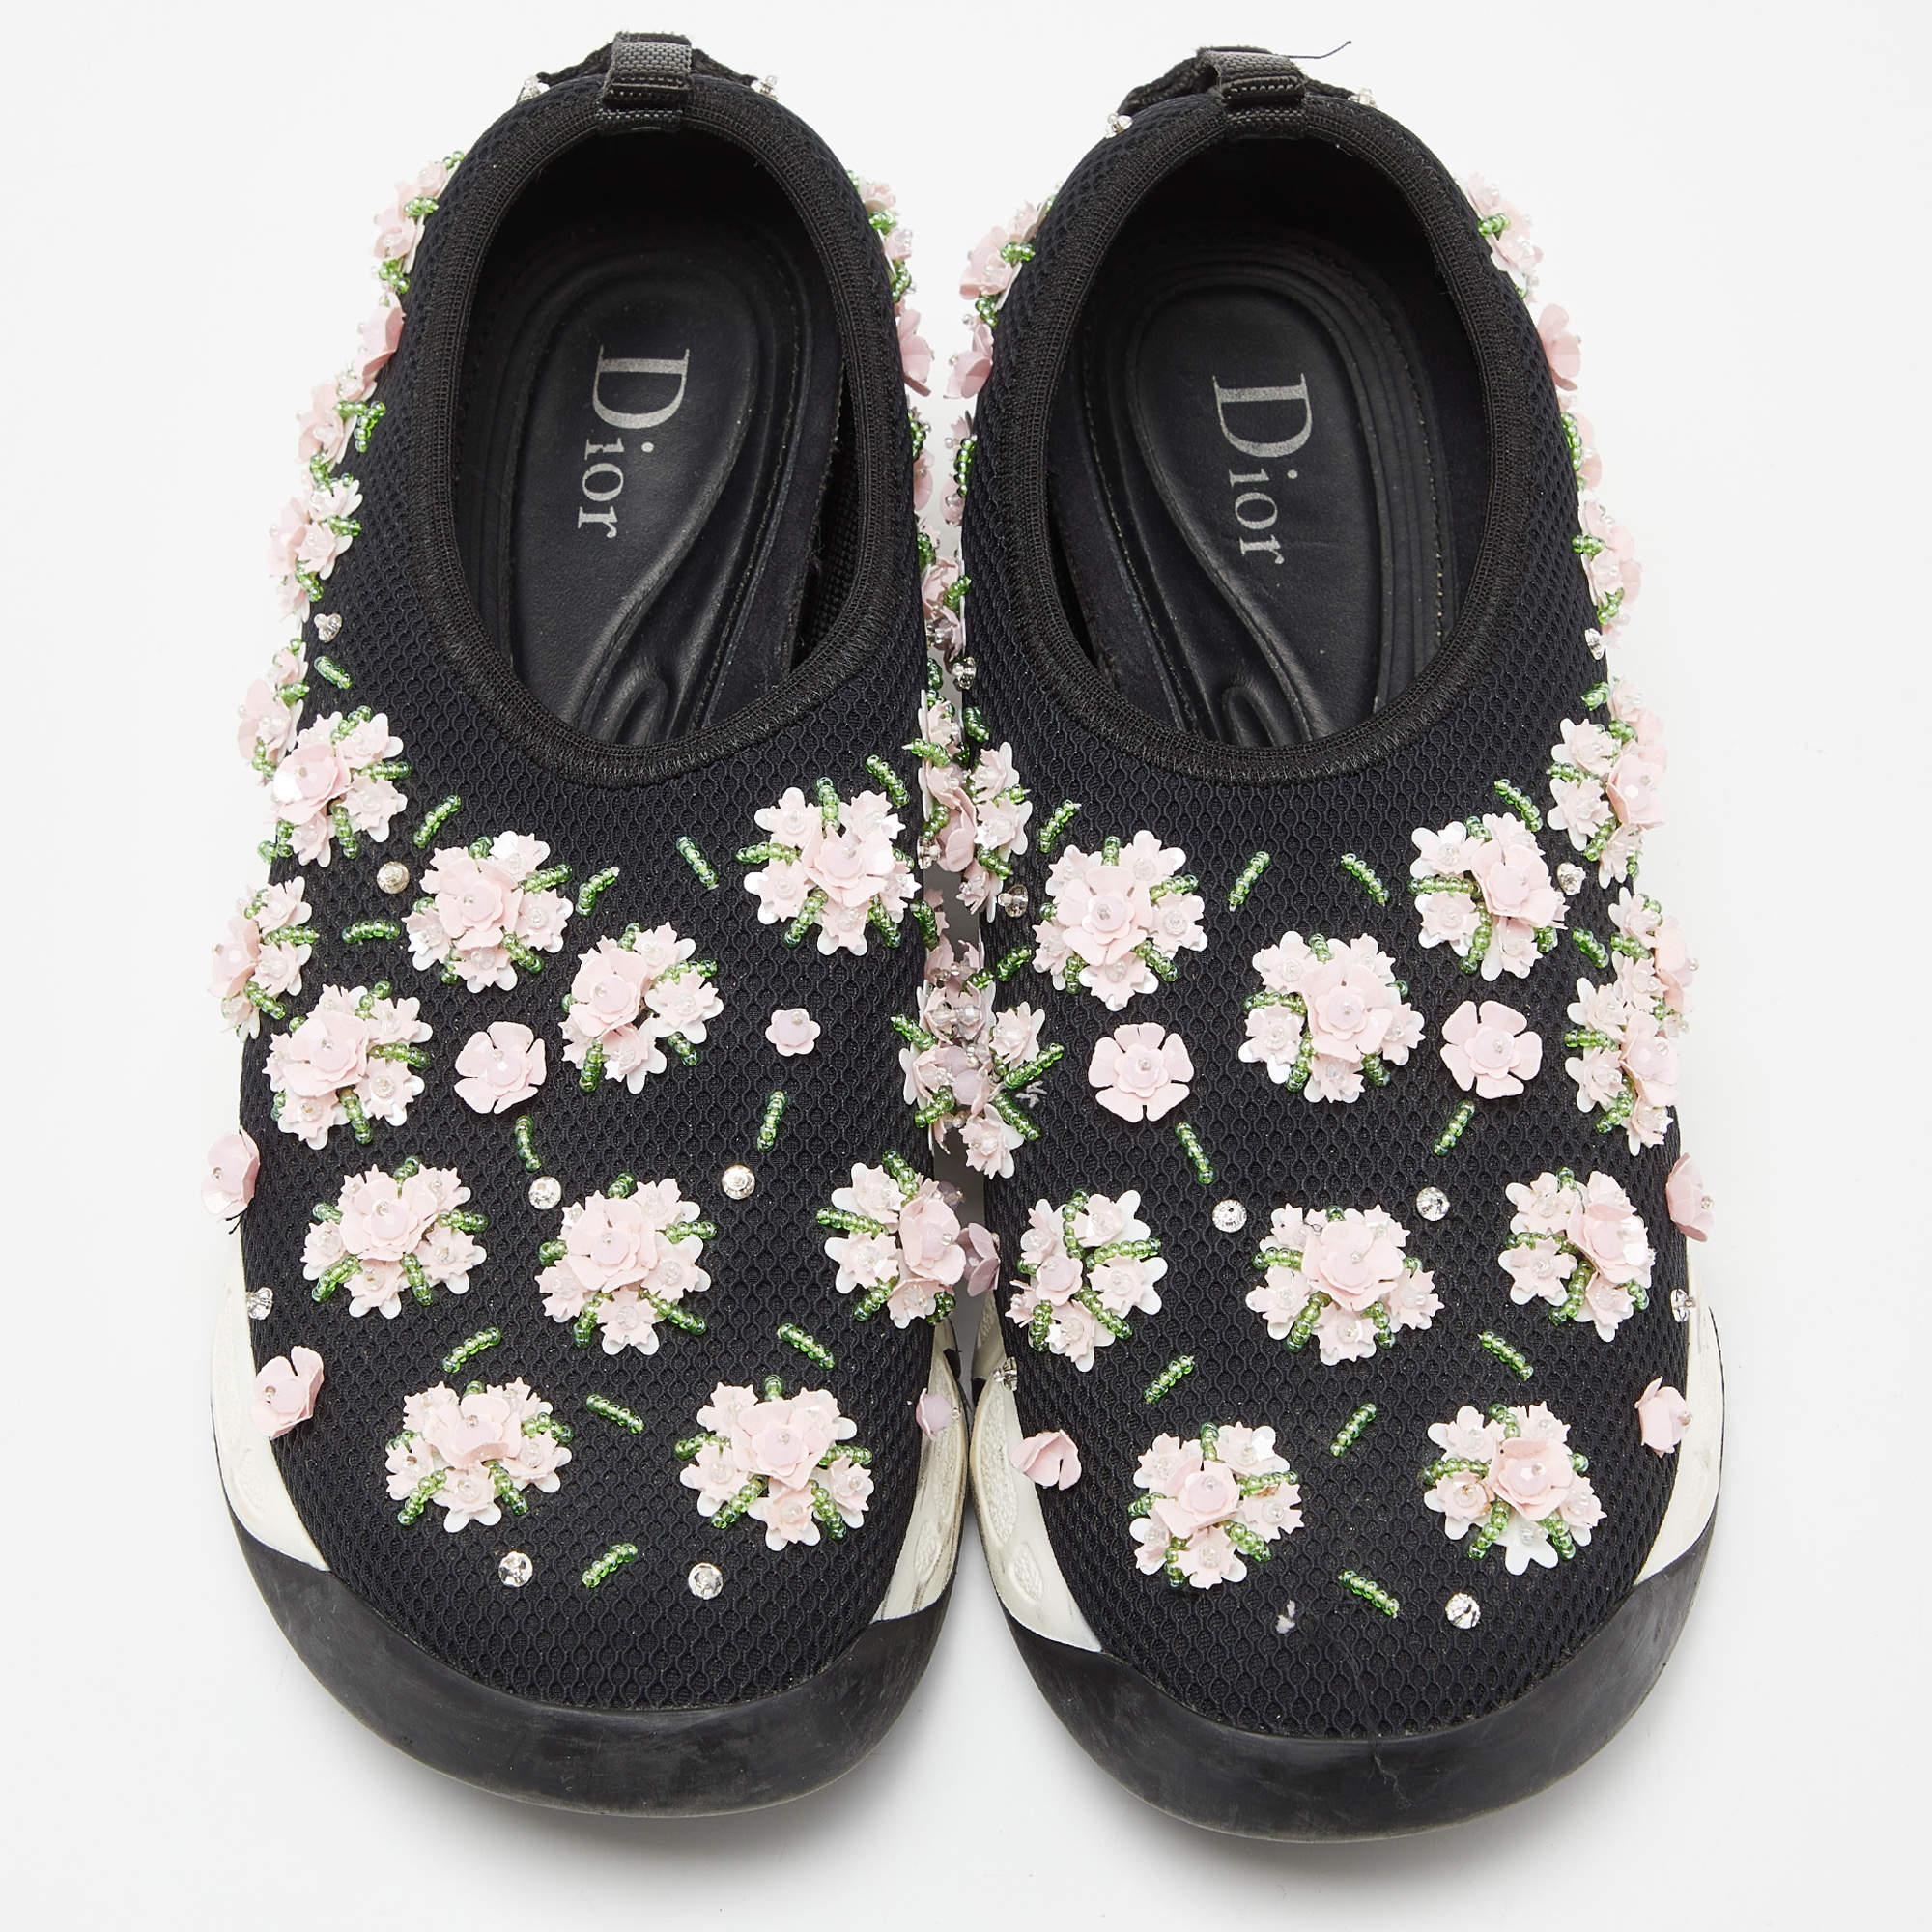 Dior Black/Pink Crystal Embellished Mesh Fusion Slip-On Sneakers Size 36 In Good Condition For Sale In Dubai, Al Qouz 2